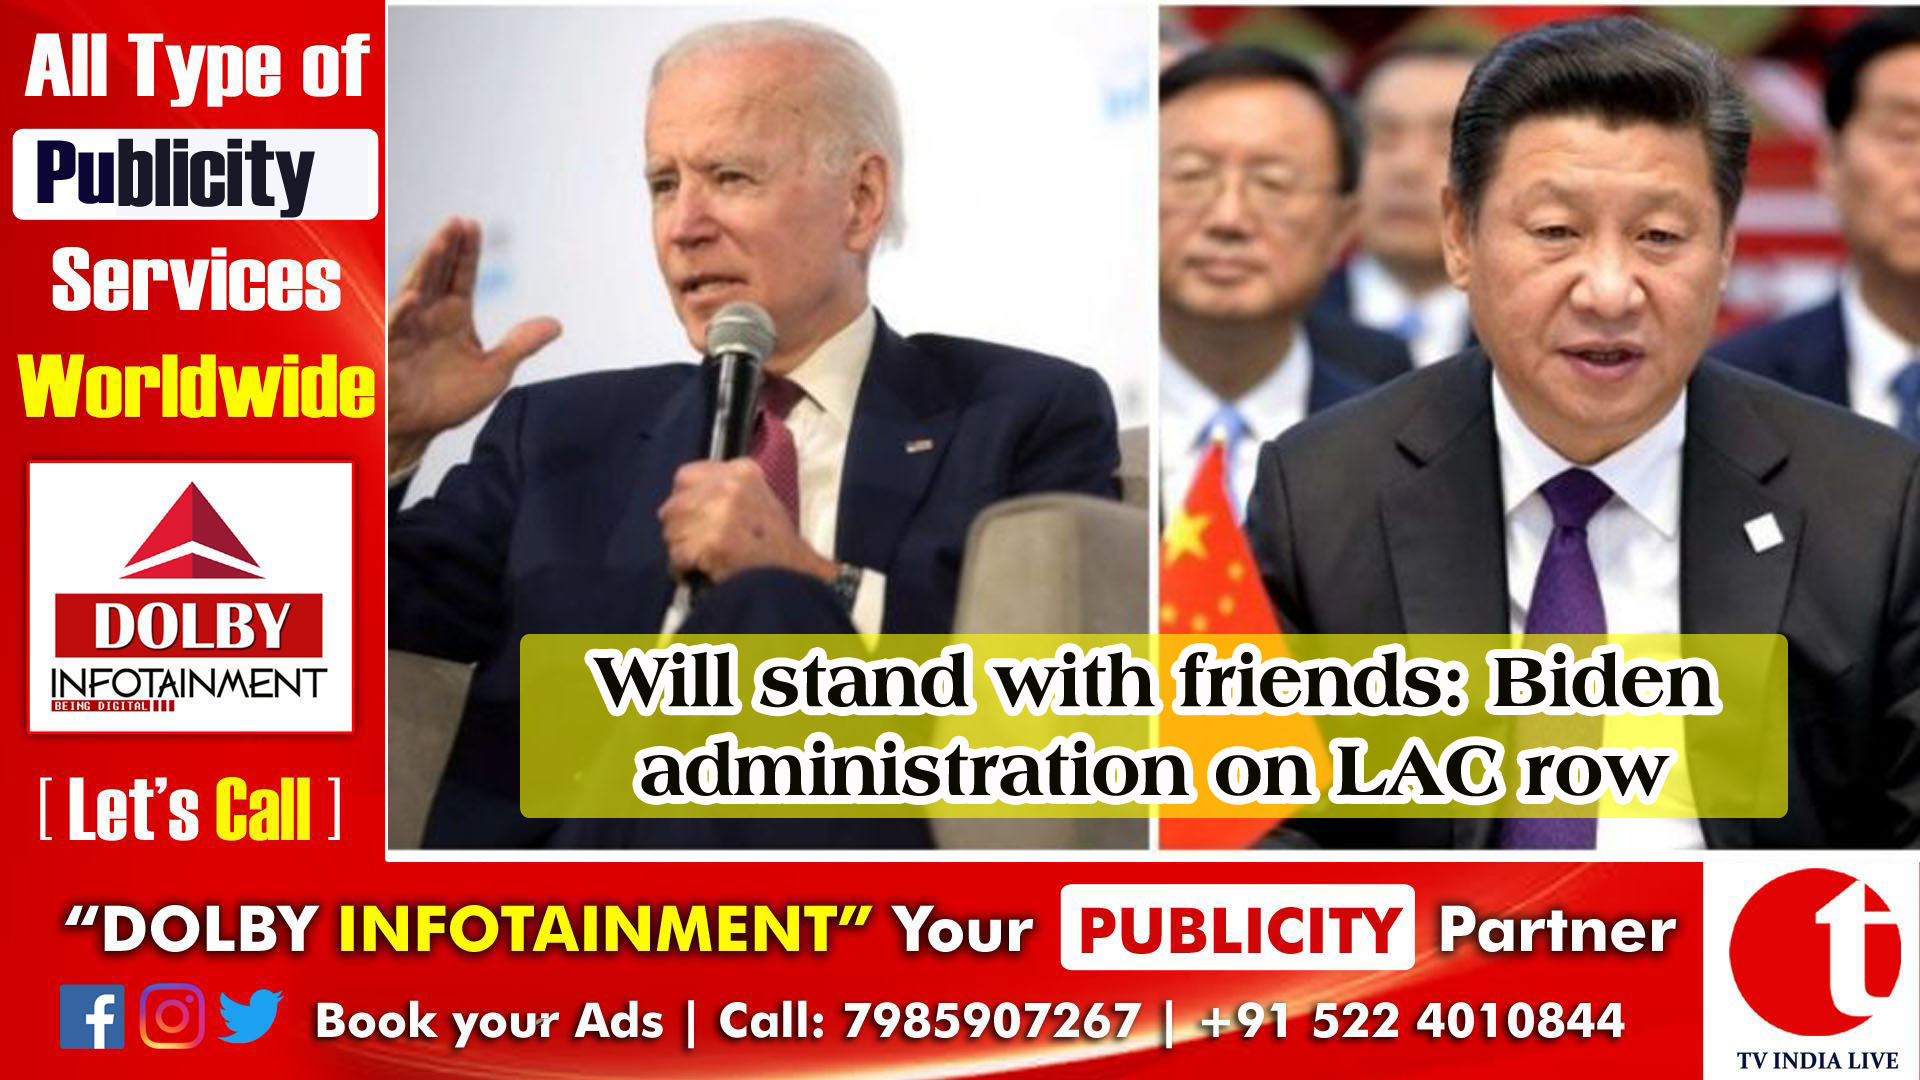 Will stand with friends: Biden administration on LAC row